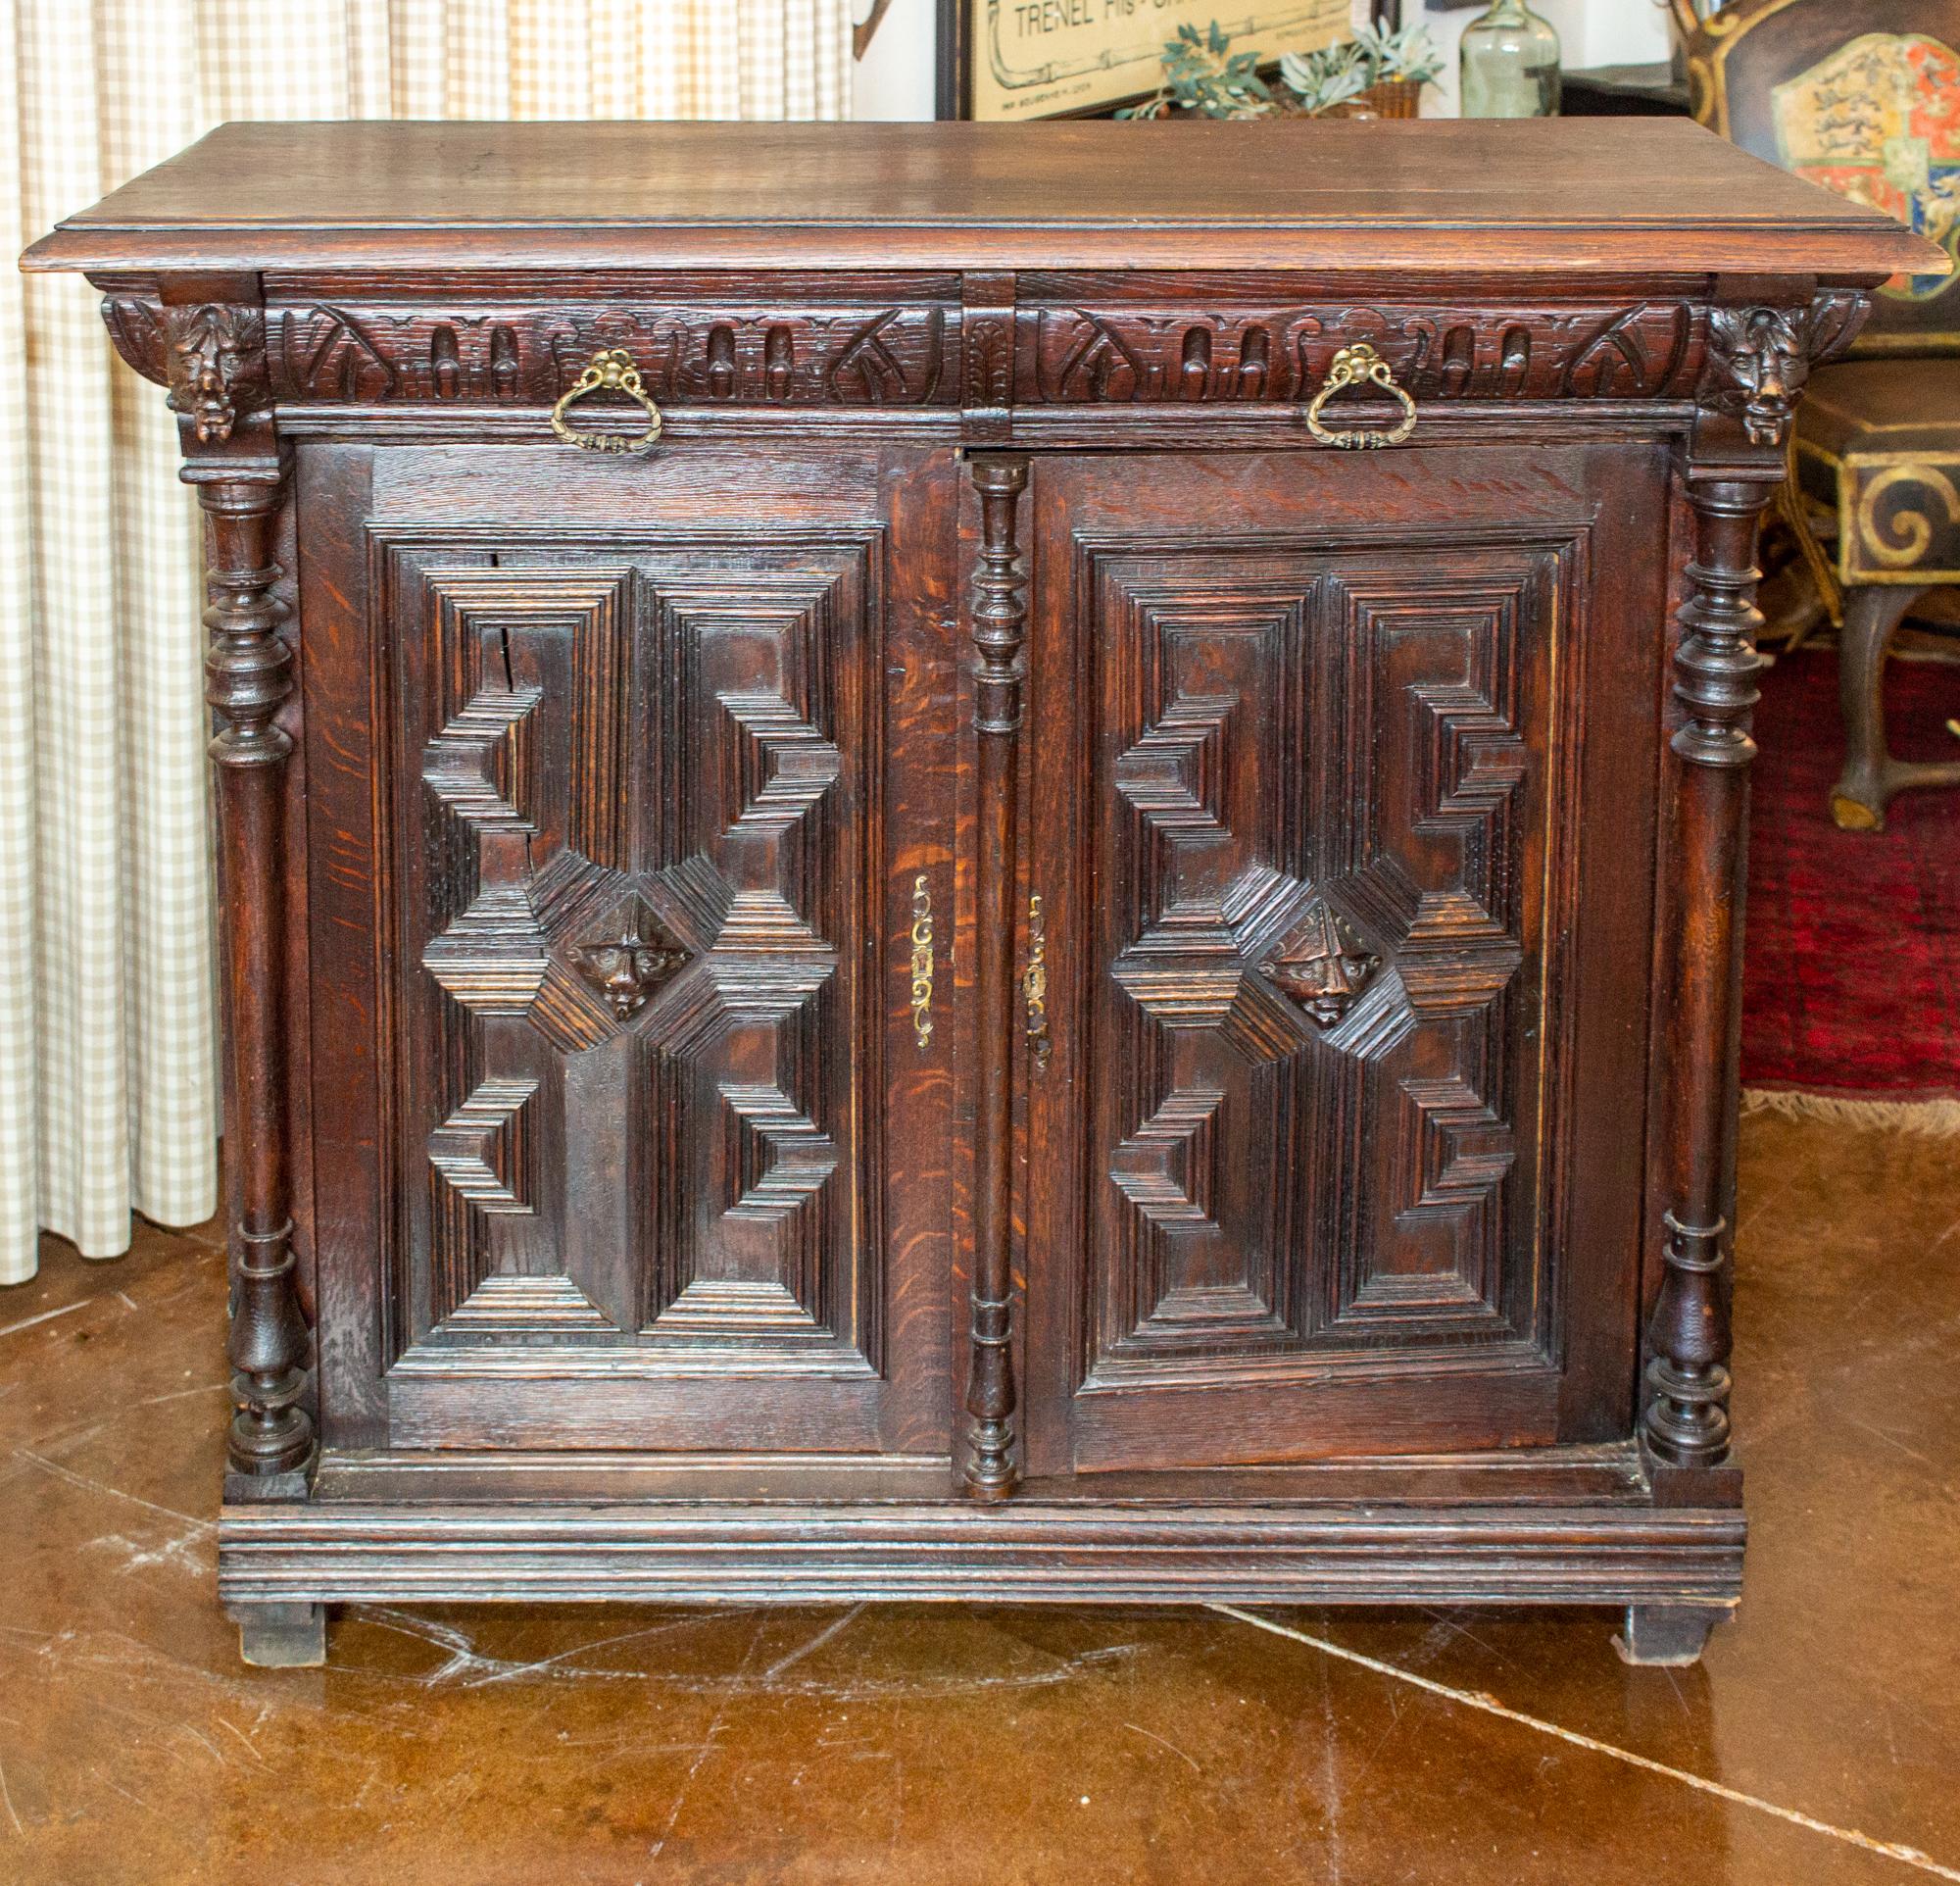 This antique Belgian buffet features ornate geometric carvings and a beautiful, rich, patinated wood finish. The doors have head-shaped 